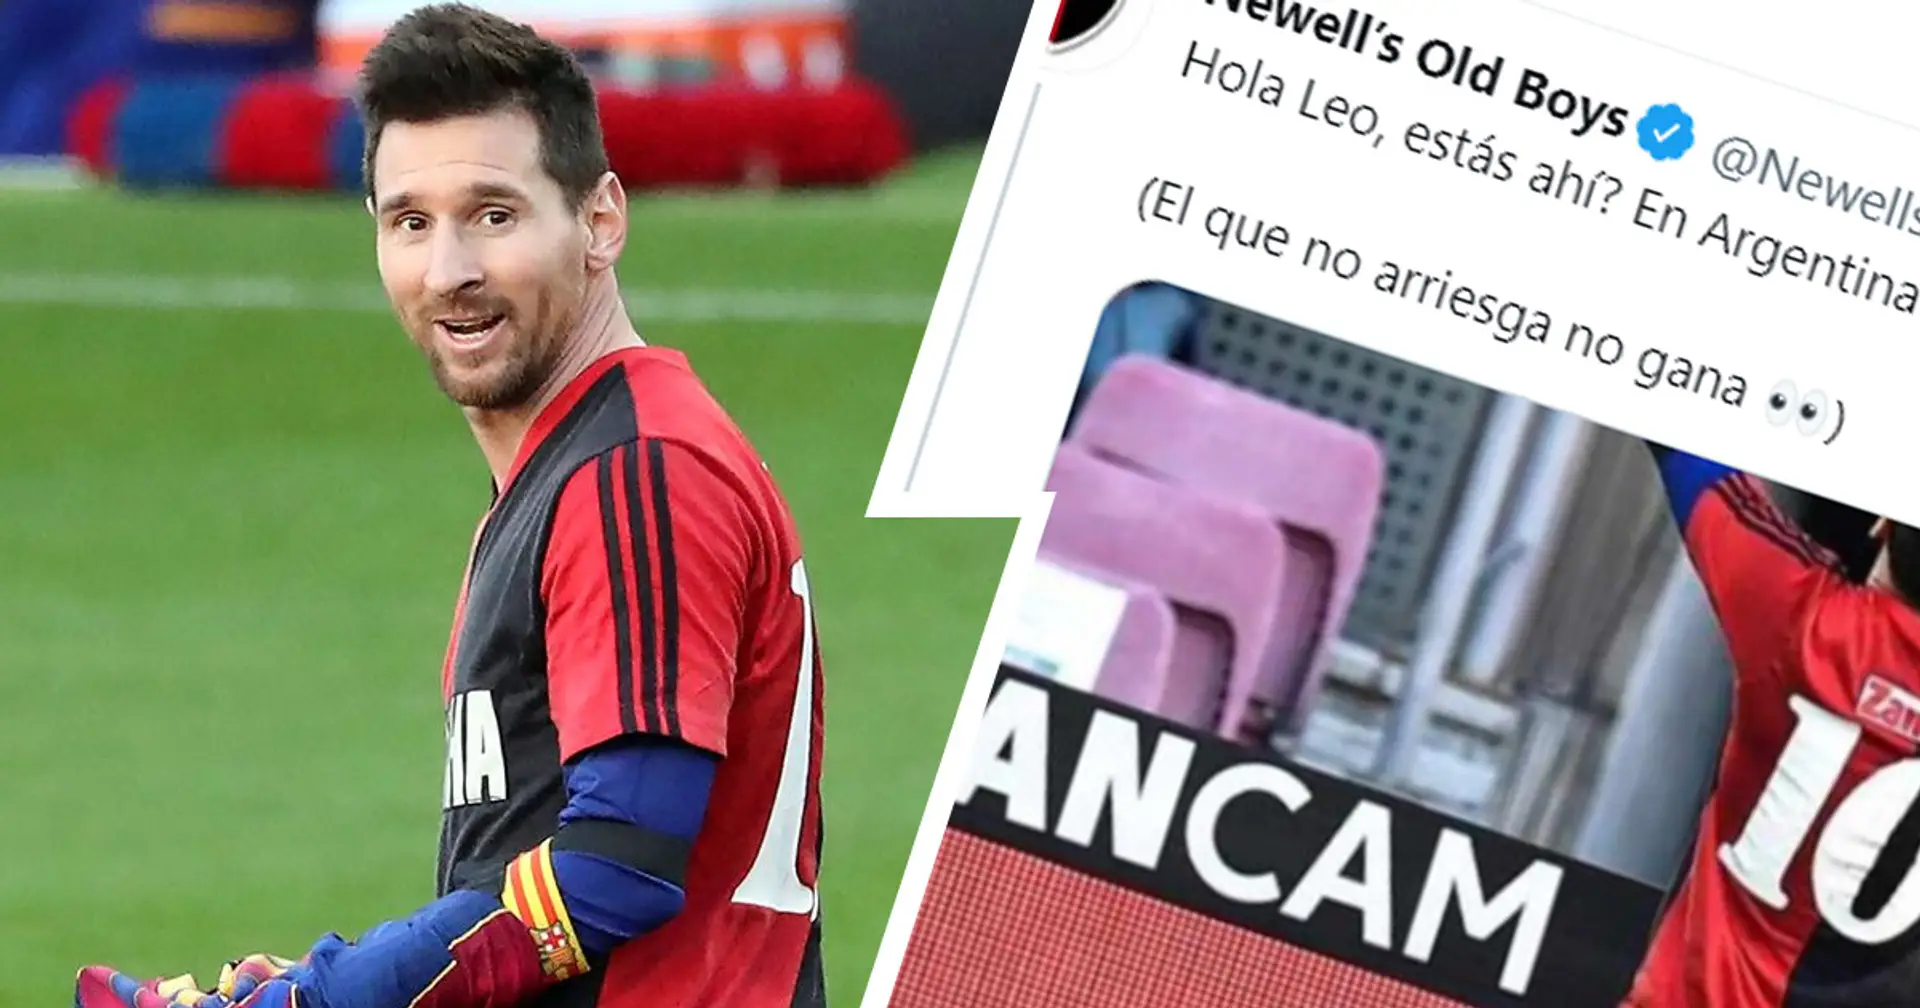 'Hi Leo, are you there?': Newell's Old Boys jokingly welcome Messi back as Argentine becomes free agent